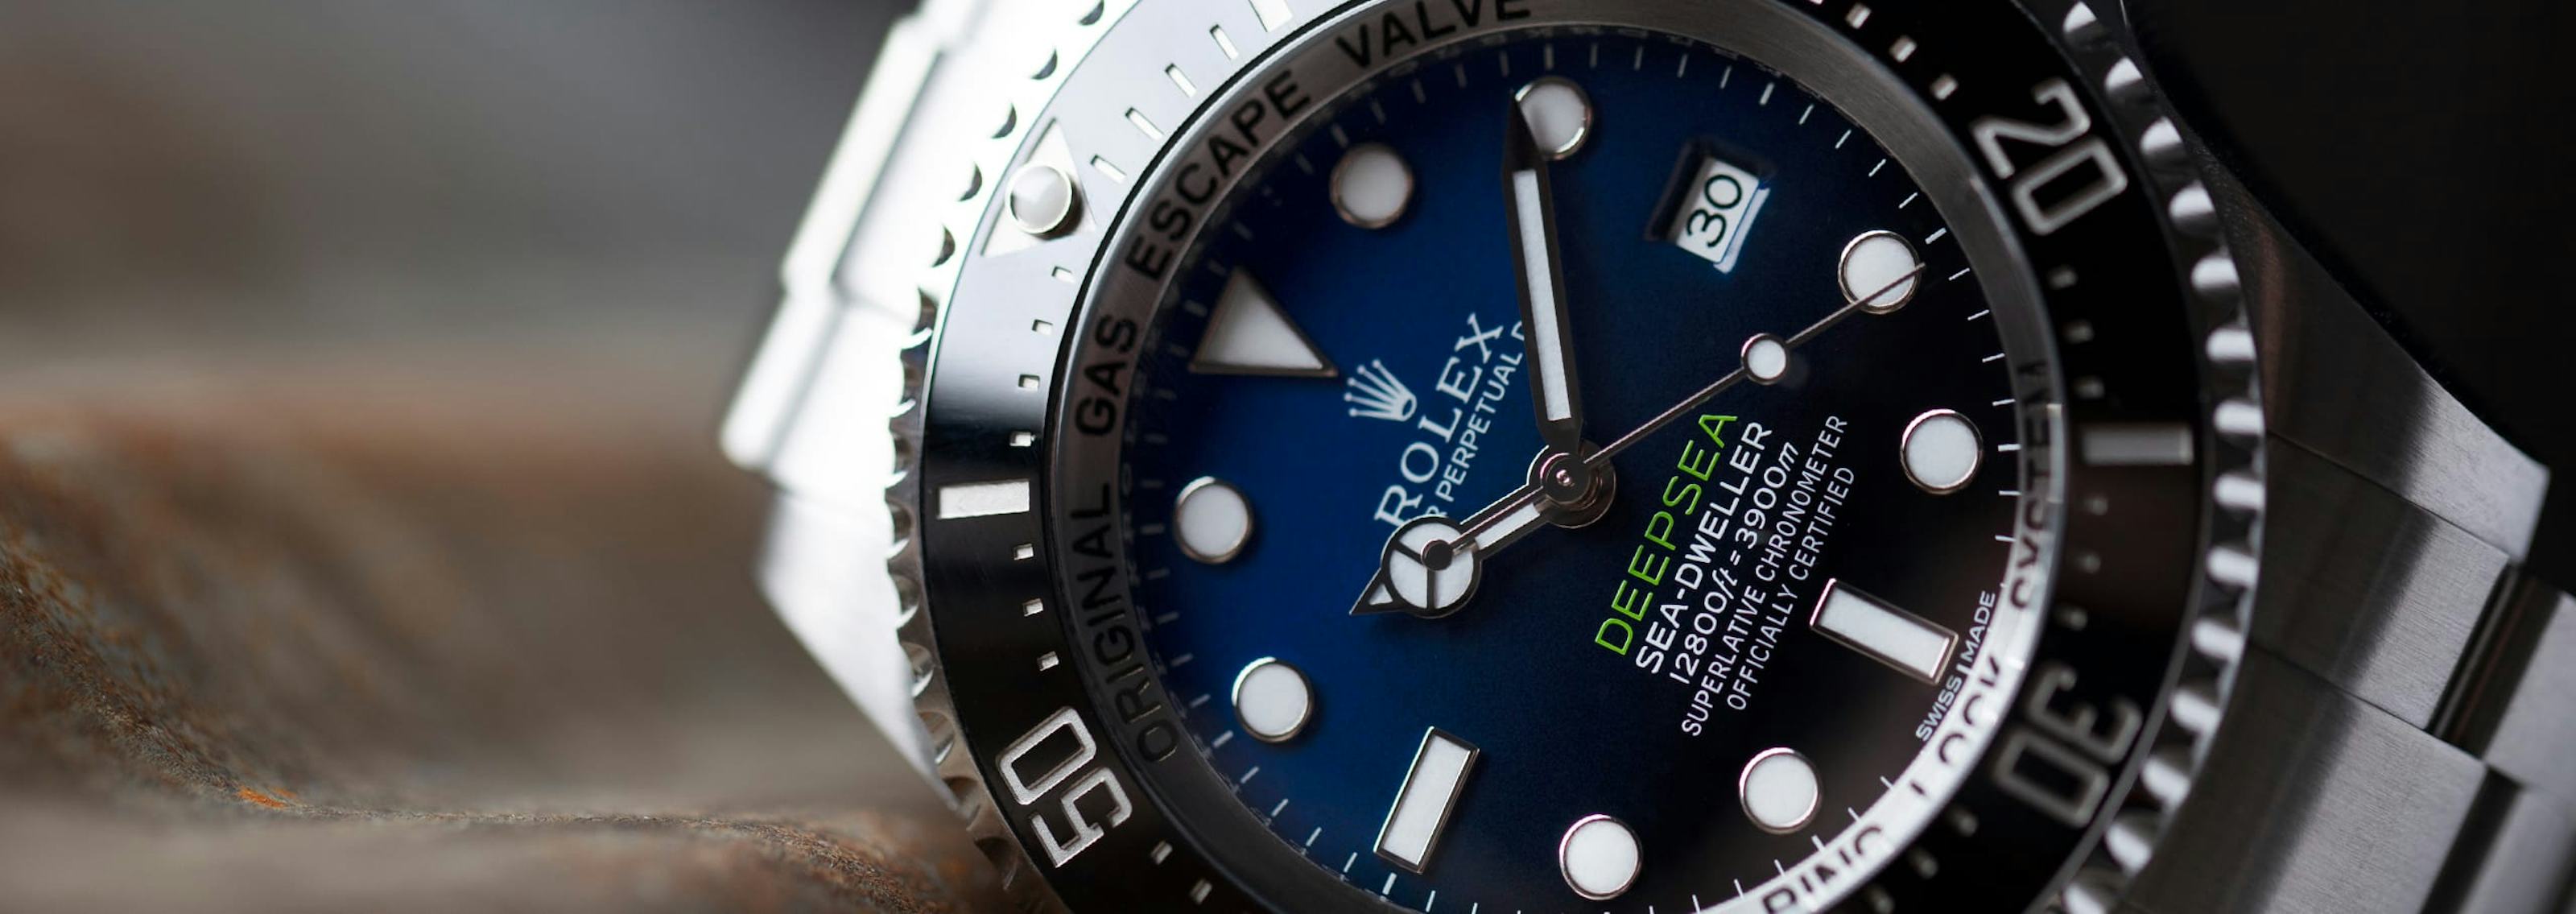 Rolex Deepsea: The Most Extreme Rolex Dive Watch Offered to the Public